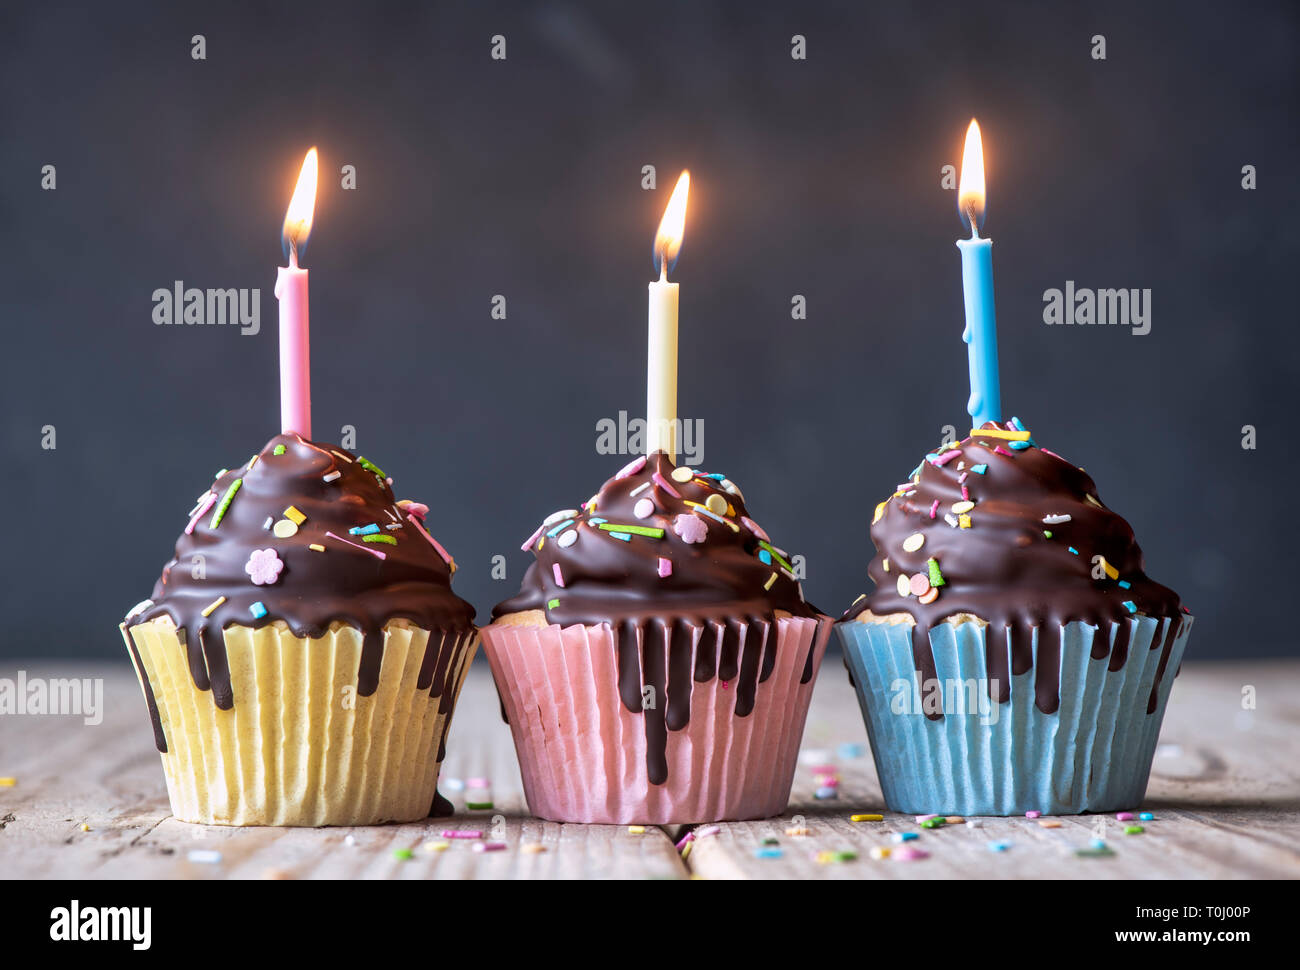 Birthday cupcakes with candles. Vanilla cupcakes with a meringue frosting and dark chocolate shell Stock Photo